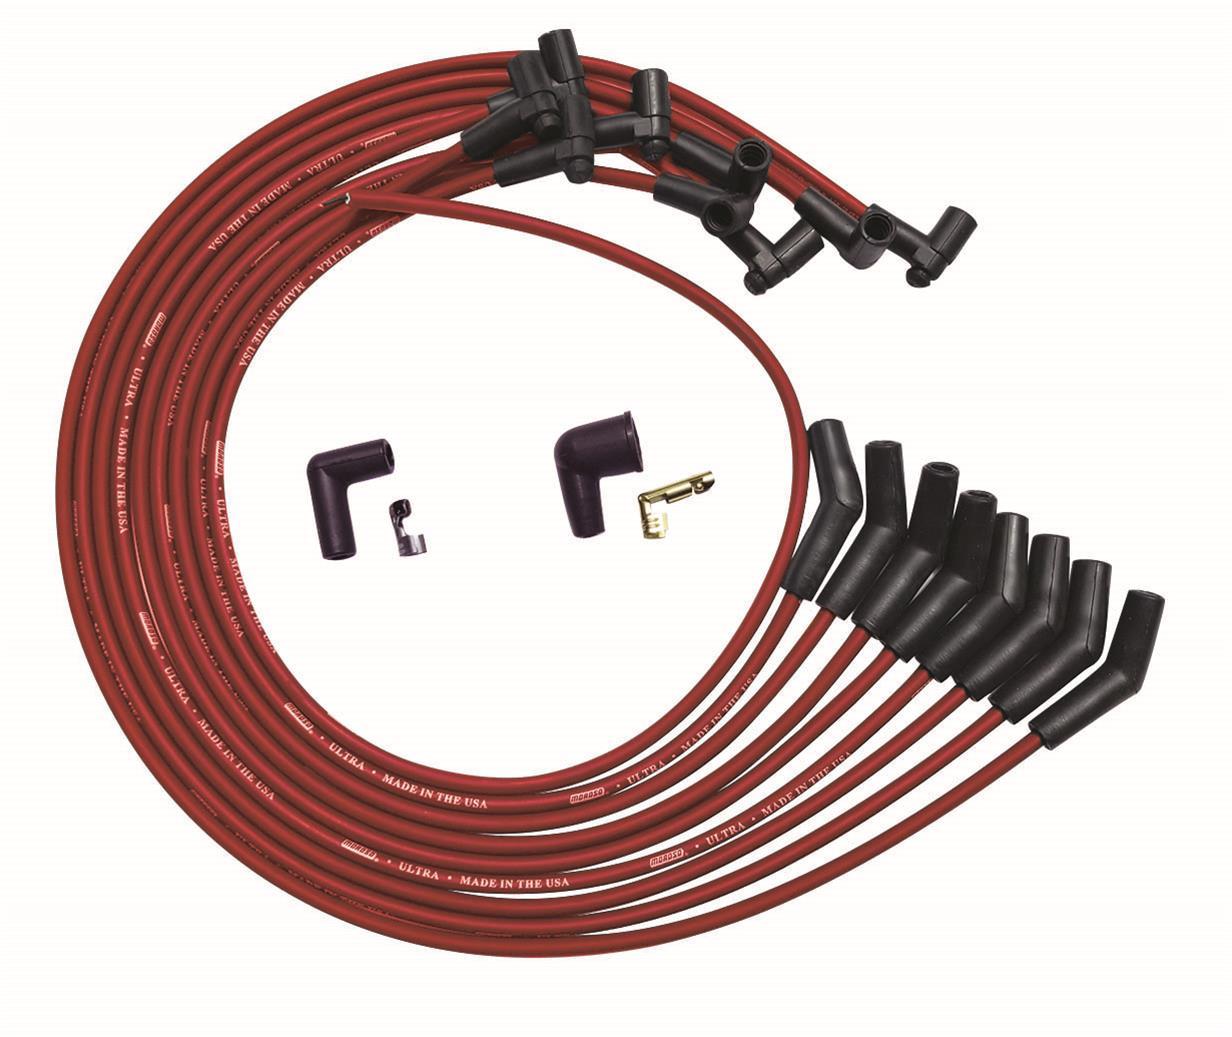 Moroso 52045 Spark Plug Wire Set, Ultra, Spiral Core, 8 mm, Red, 135 Degree Plug Boots, HEI Style Terminal, Under The Header, Big Block Chevy, Kit